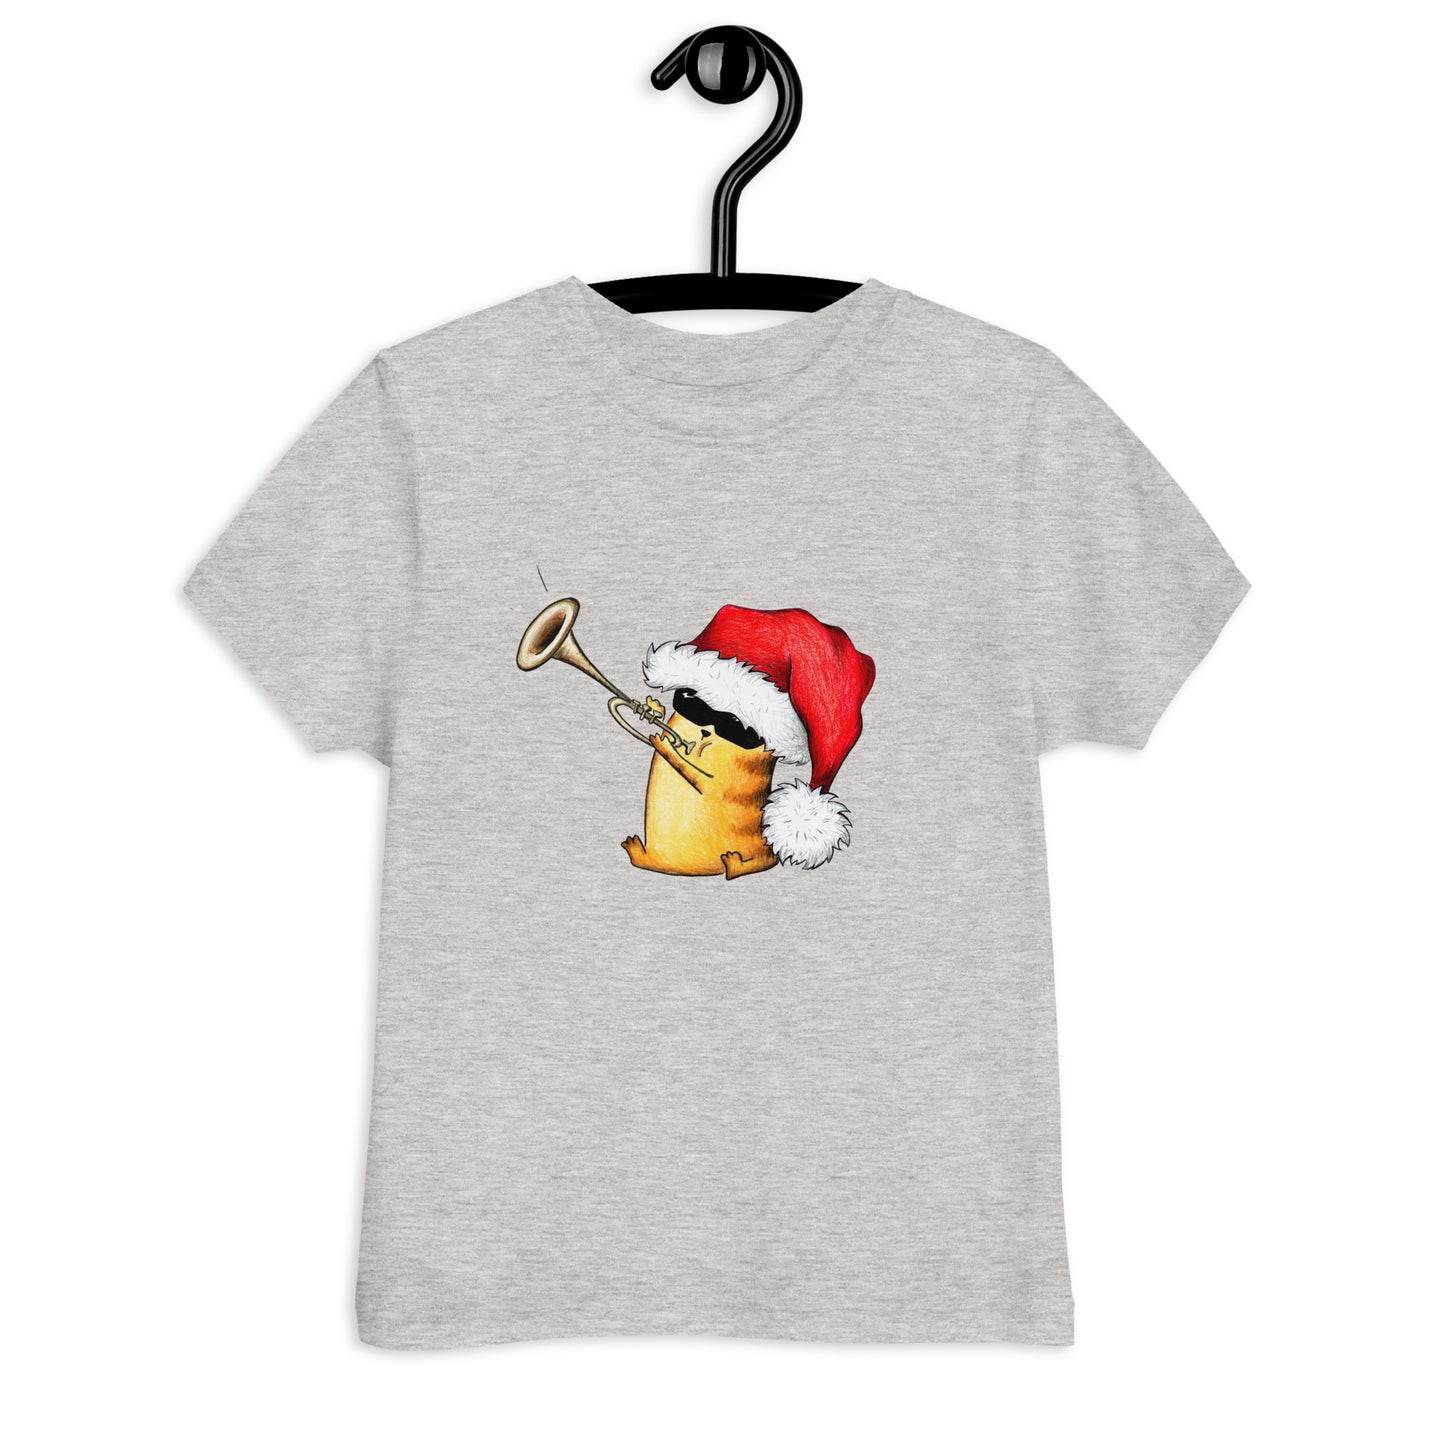 Toddler T-shirt "Christmas Cat with Trumpet"